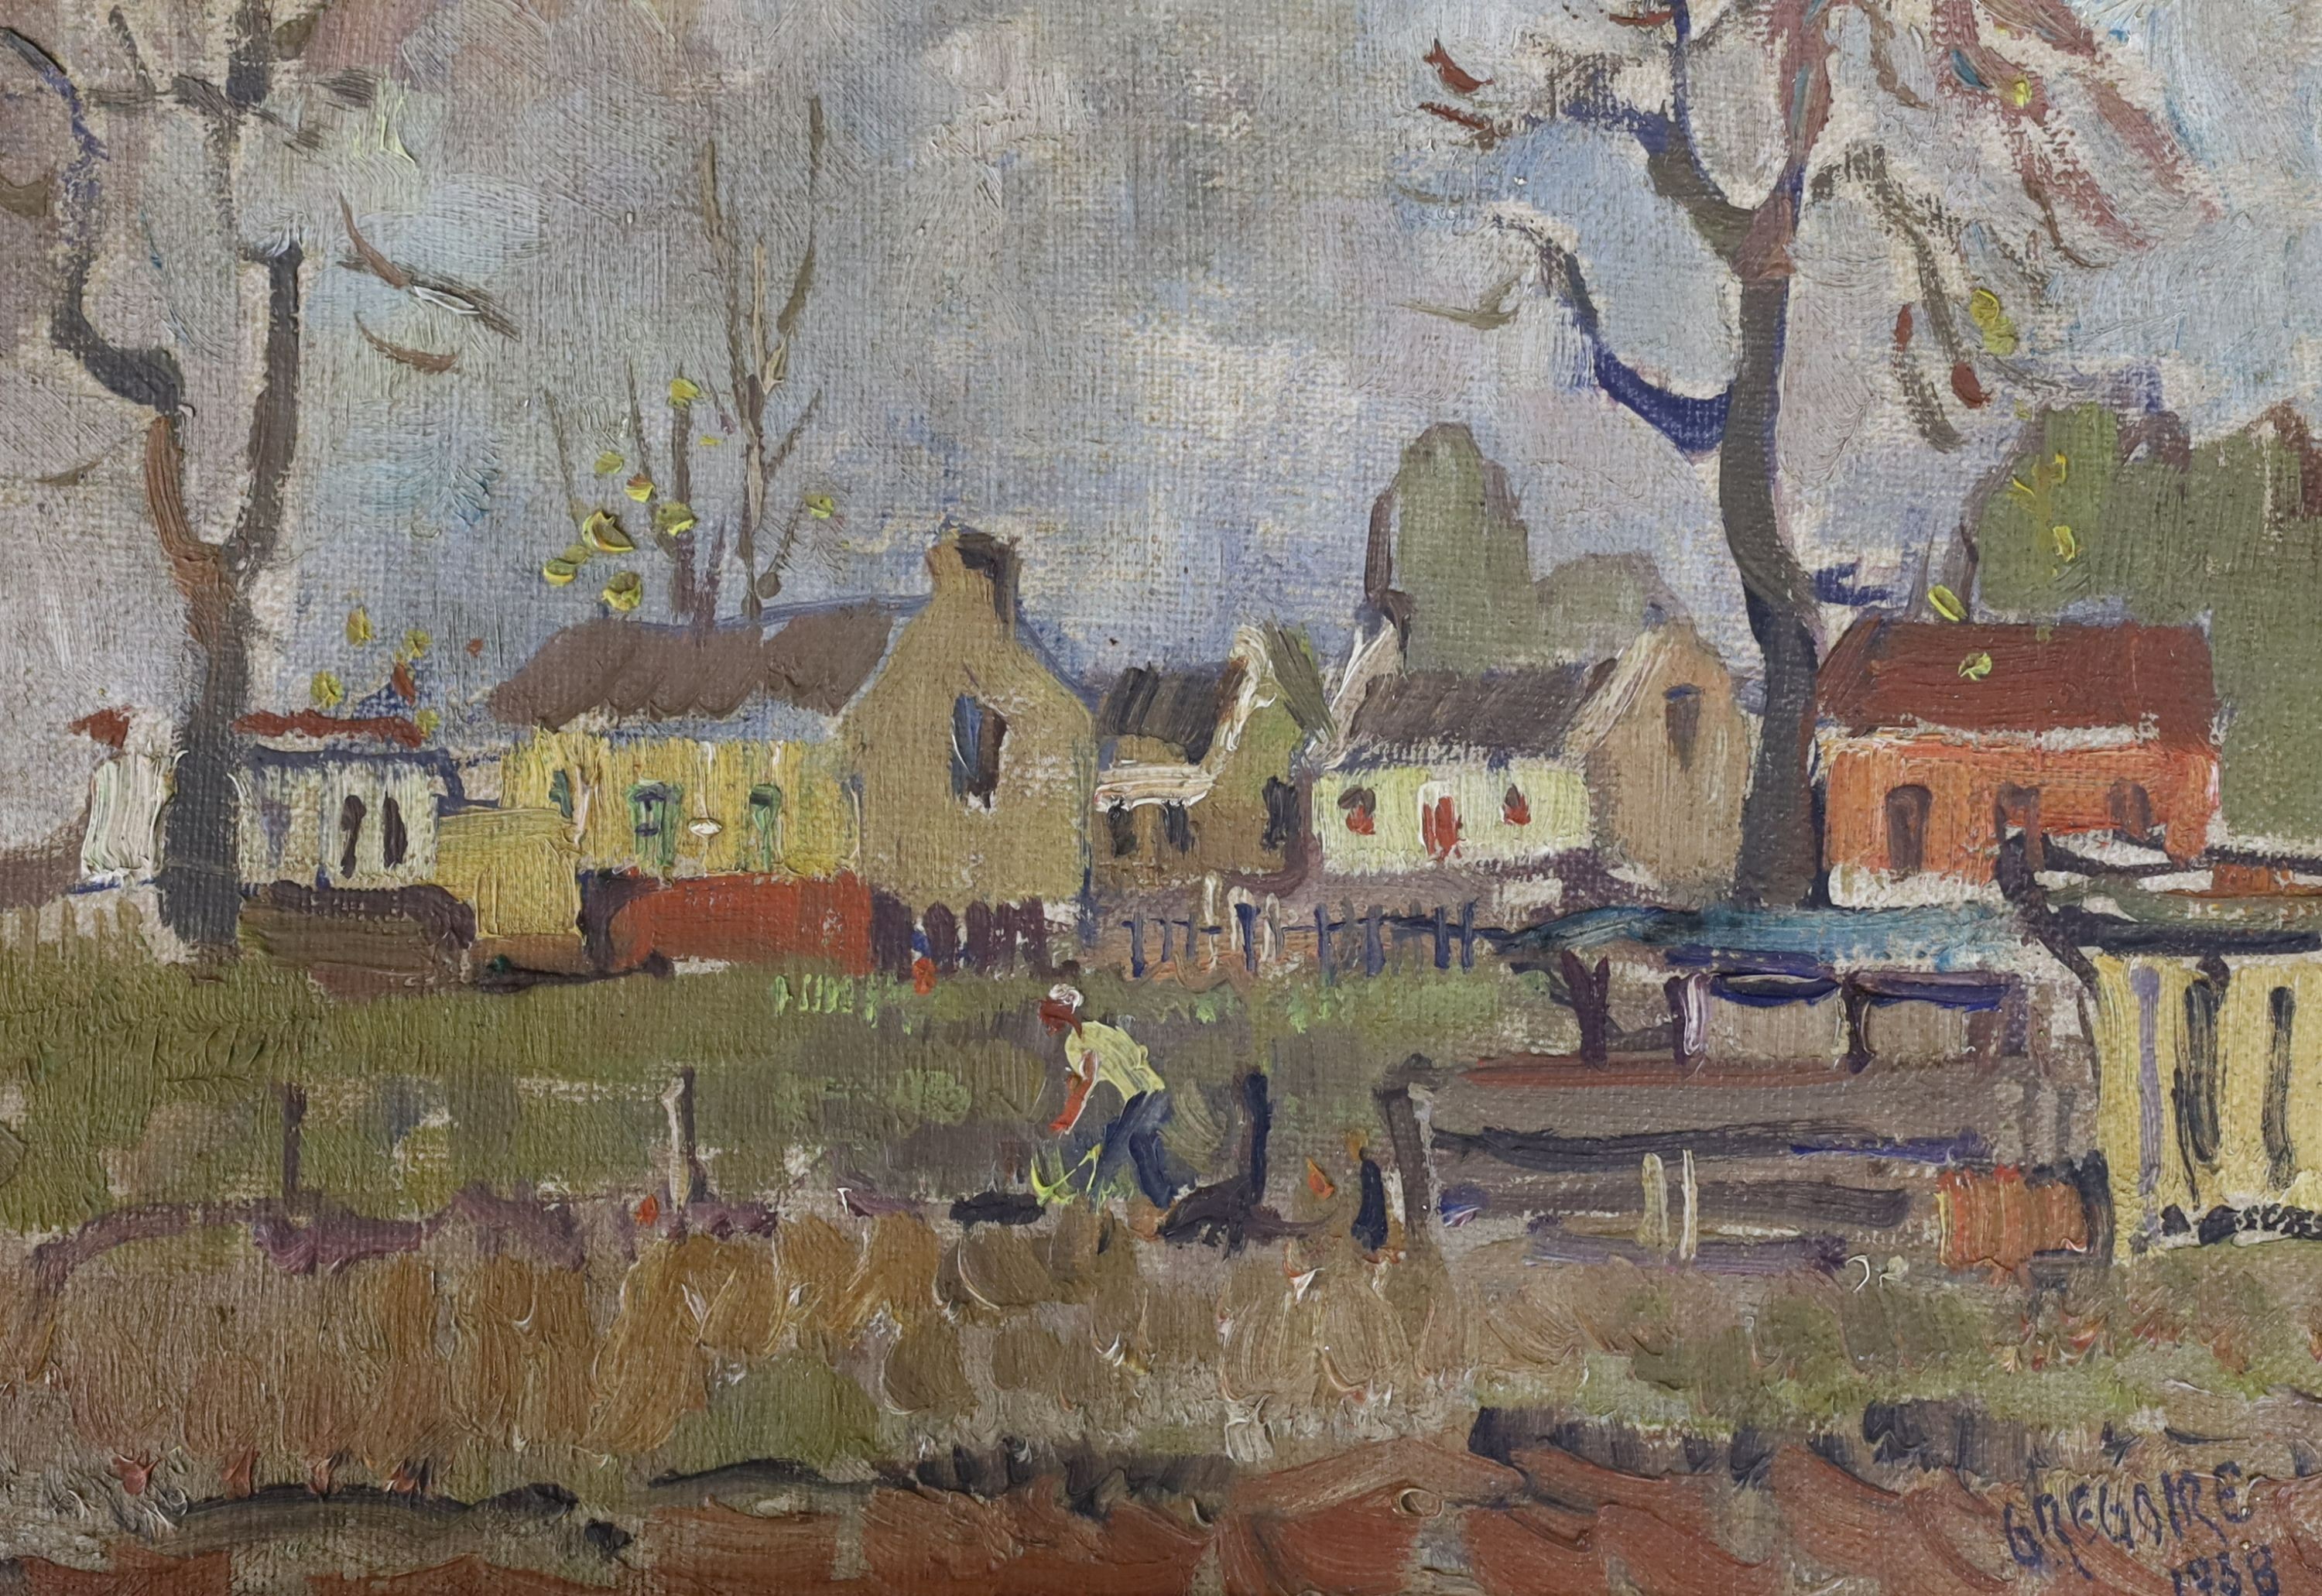 Gregoire Johannes Boonzaier (1909-2005), oil on canvas board, View of a village, signed and dated 1938, 17 x 25cm